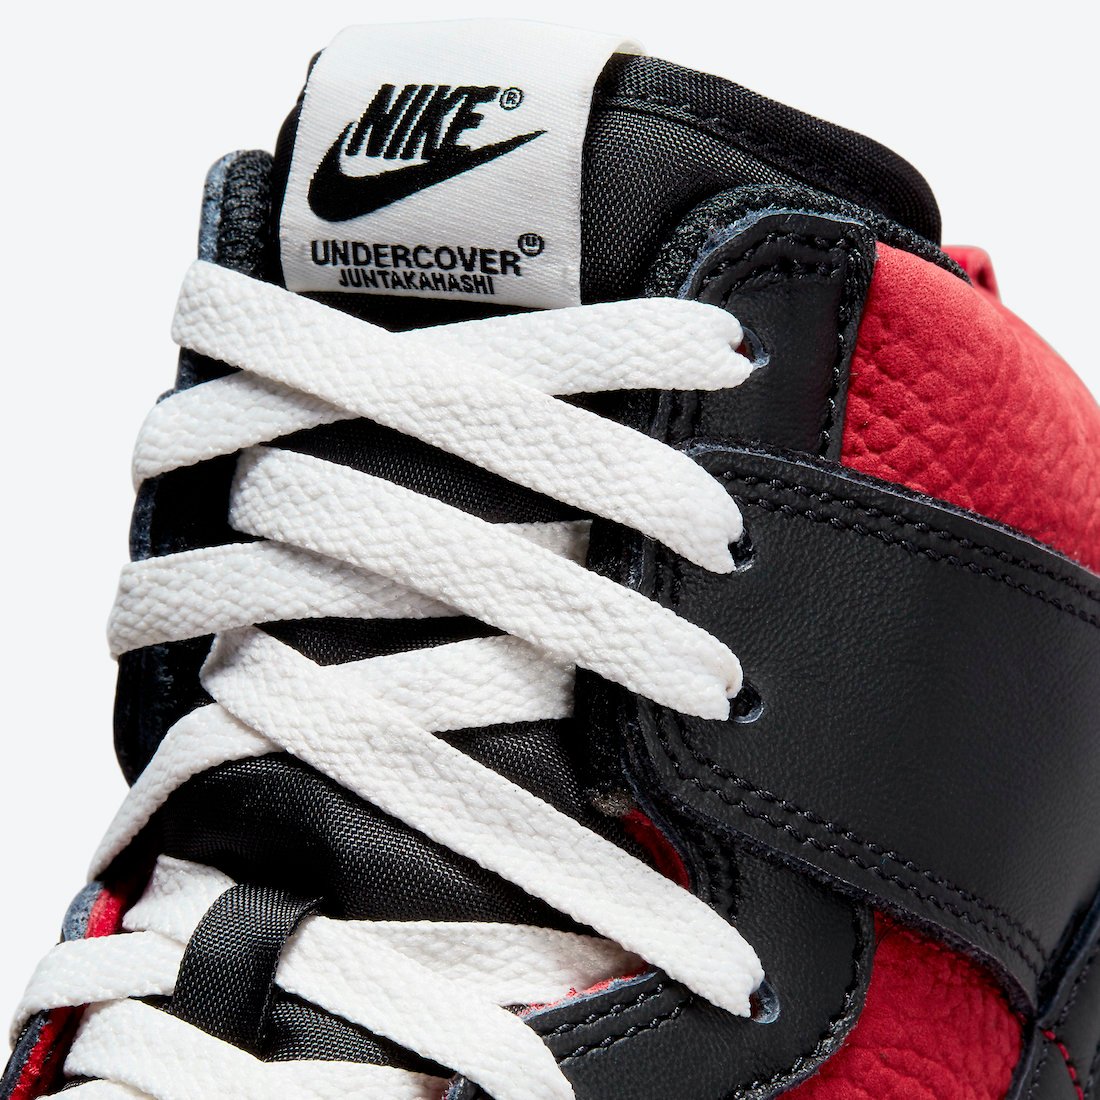 Undercover Nike Dunk High UBA Gym Red DD9401-600 Release Date